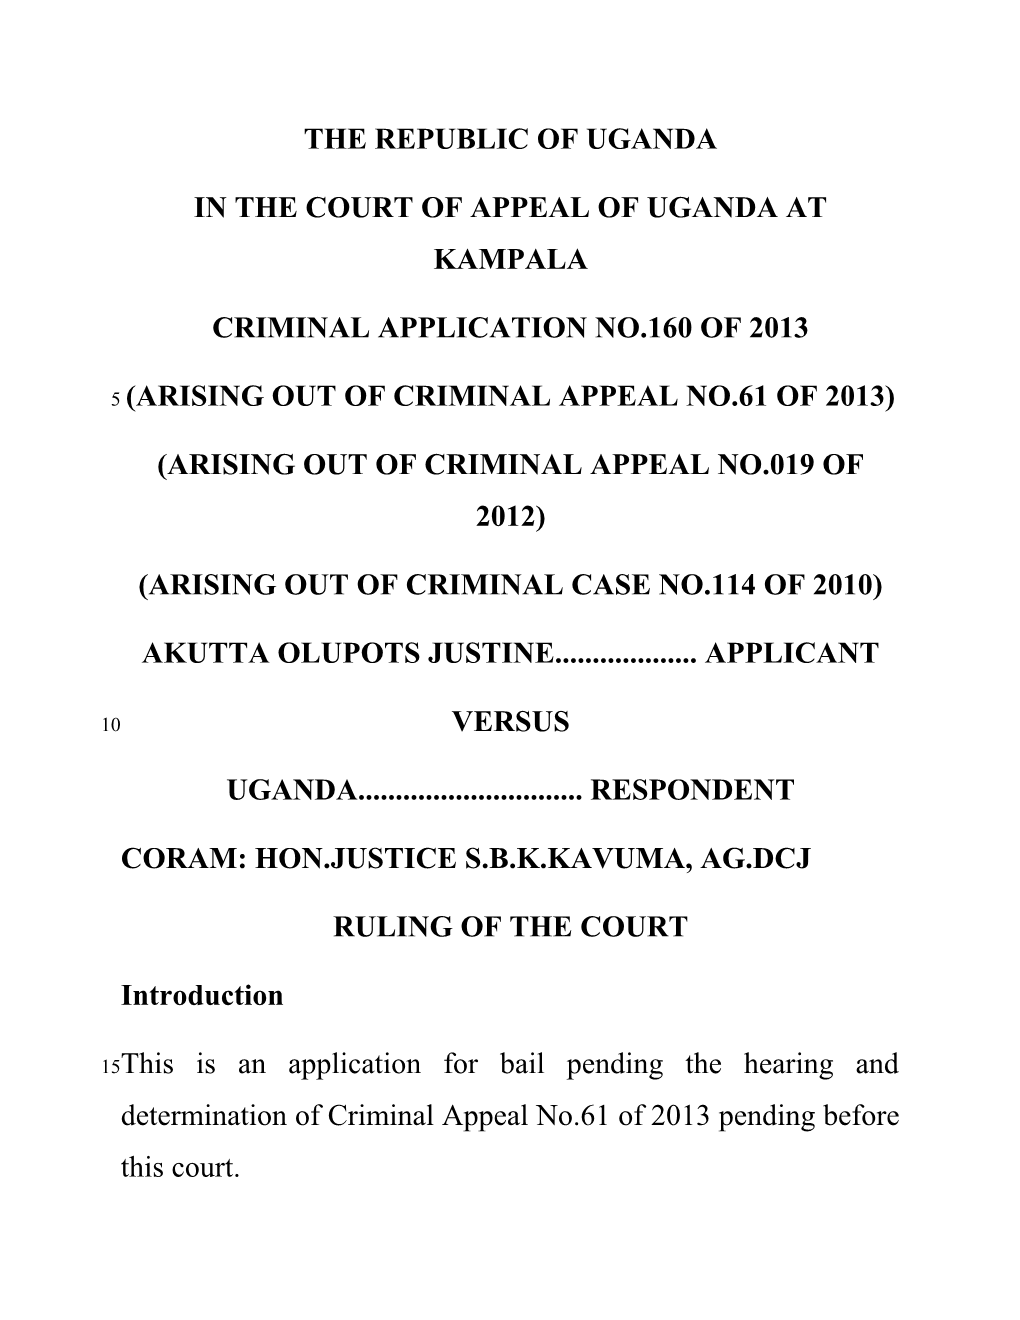 In the Court of Appeal of Uganda at Kampala